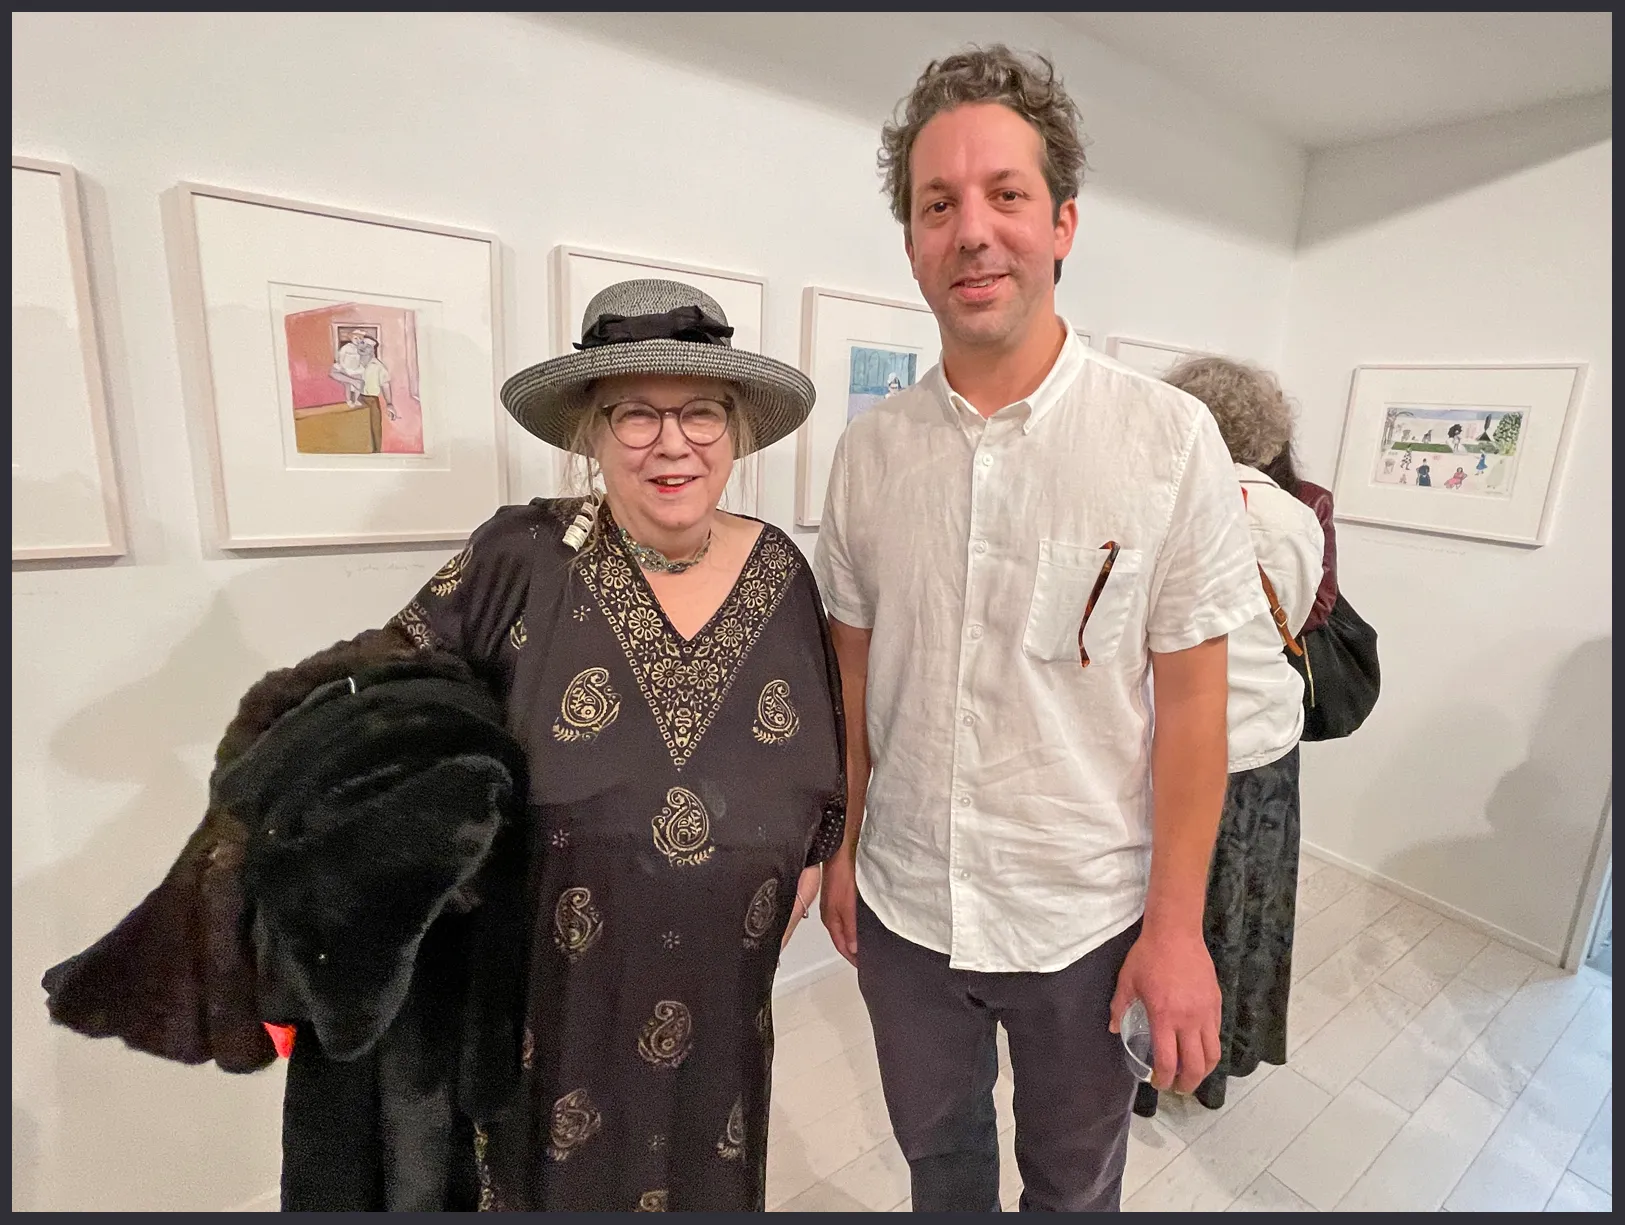 A lovely guest with Kalman’s son, the filmmaker, writer, creative director, and museum curator Alex Kalman.